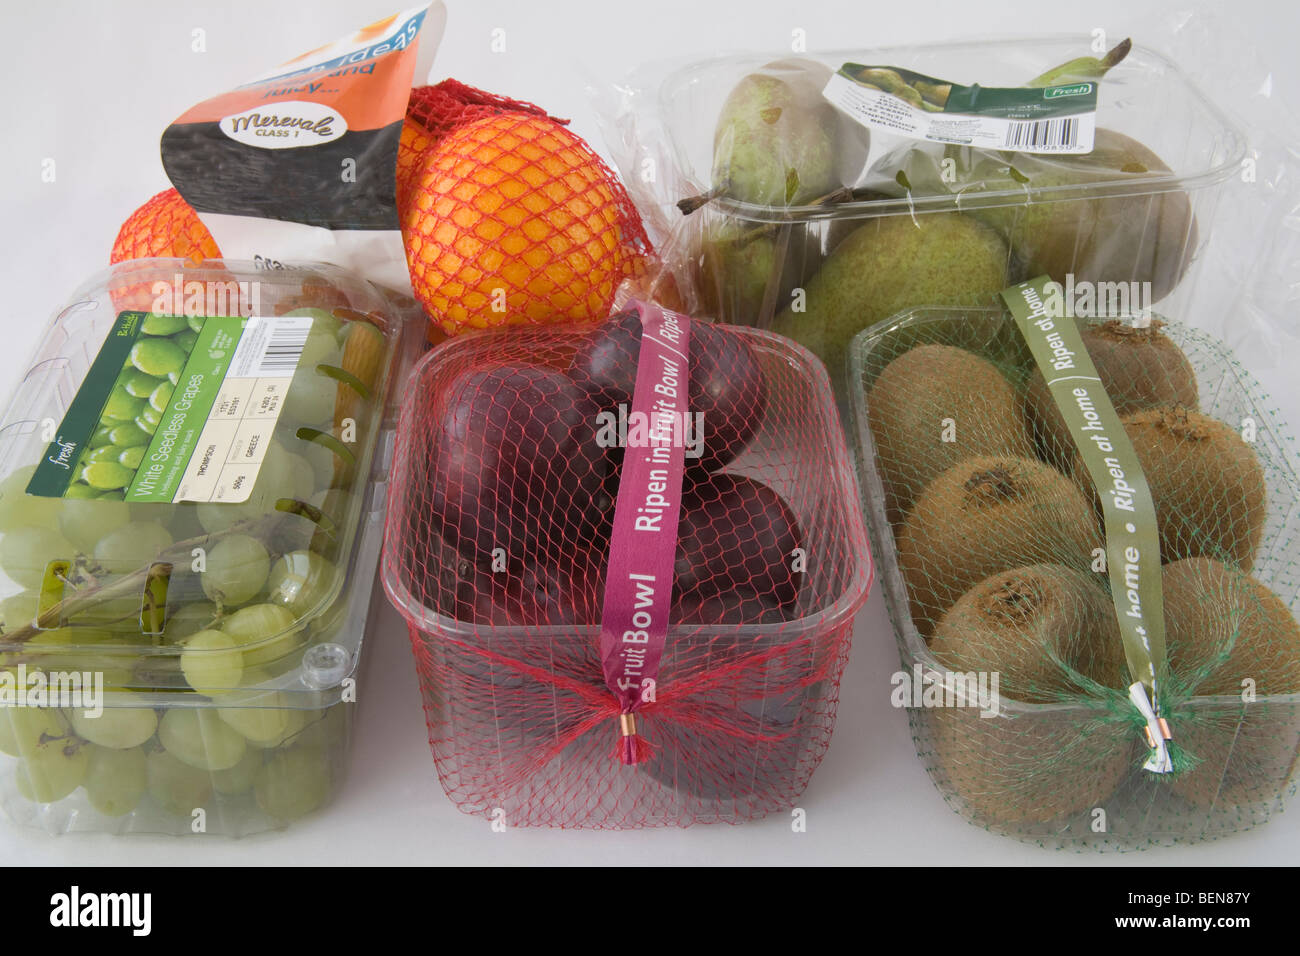 Studio close up Food packaging of five different fruits all imported Stock Photo